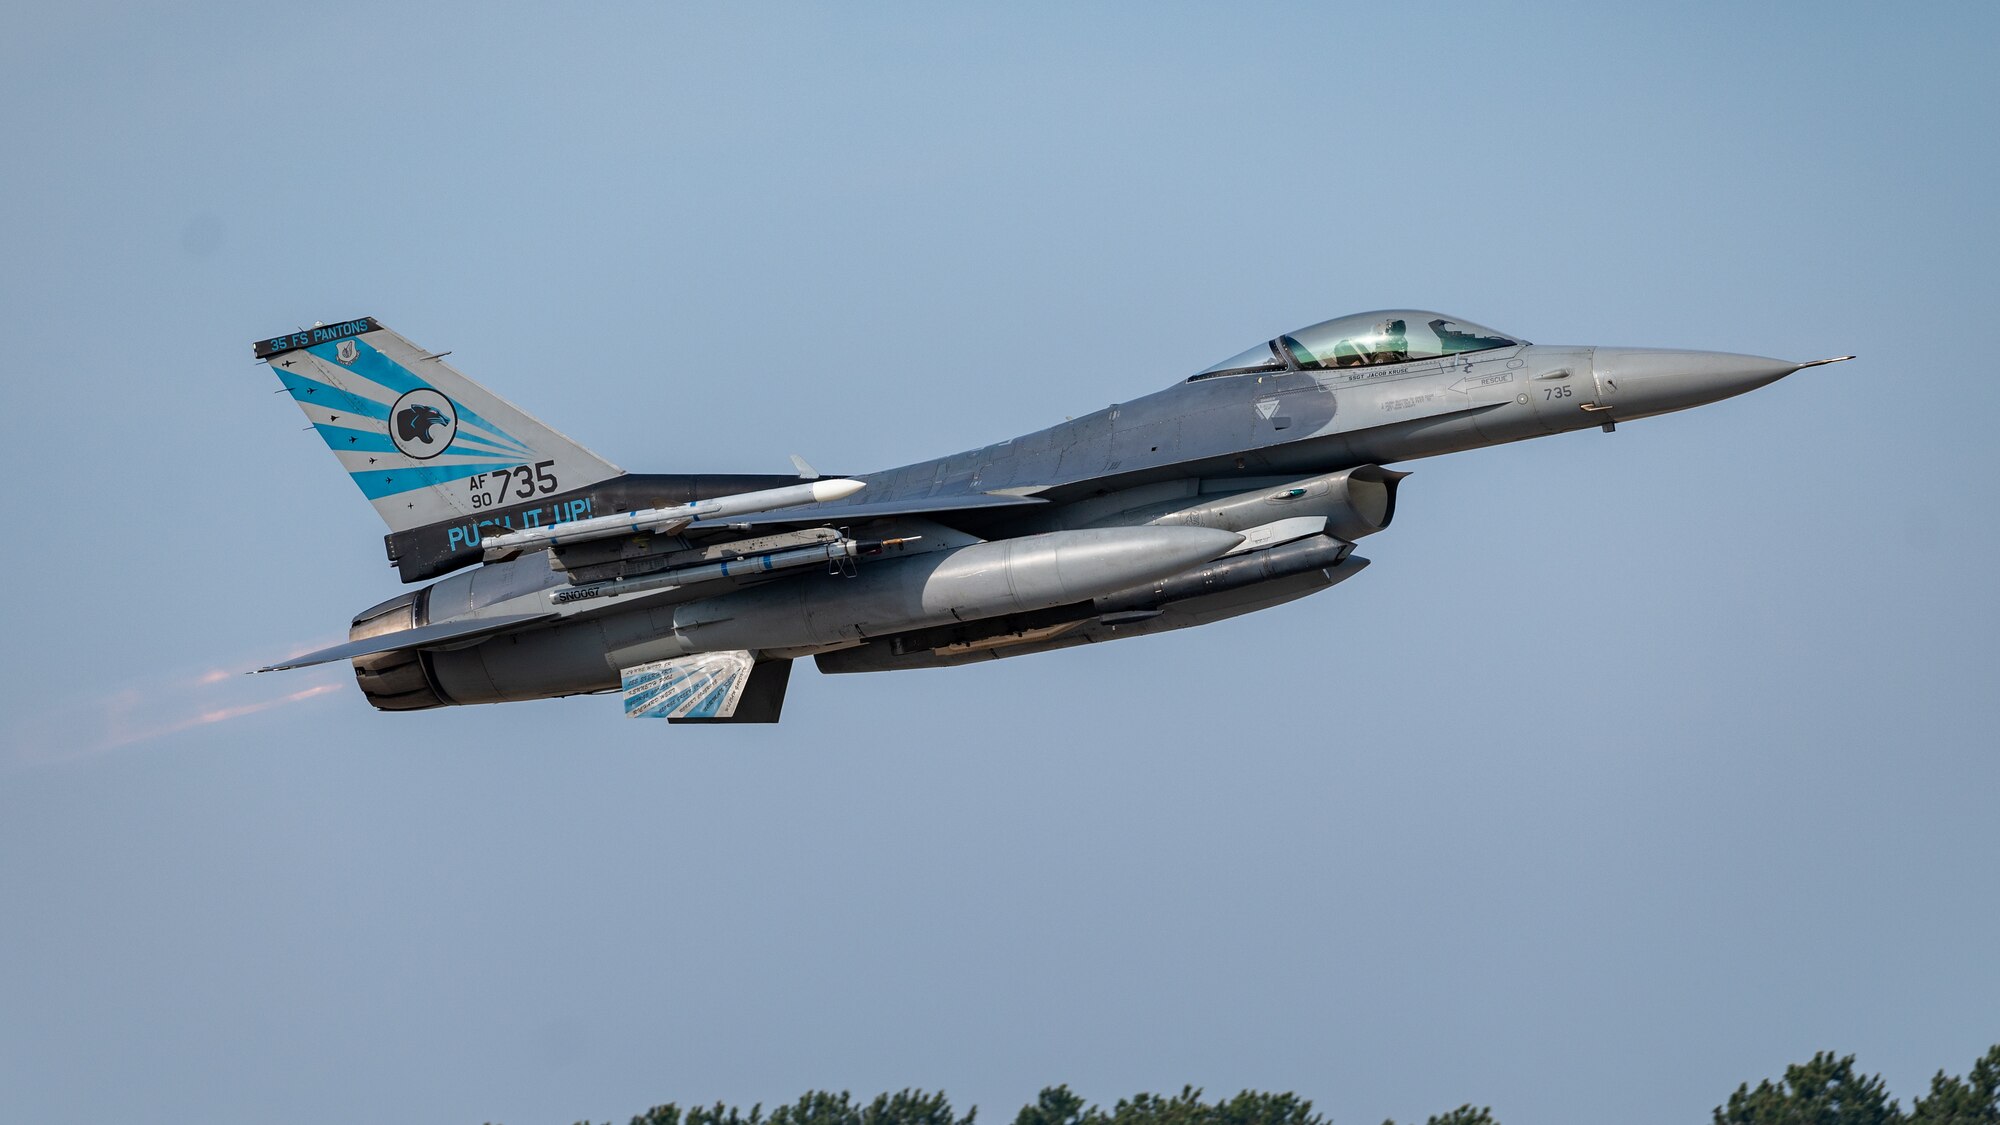 A U.S. Air Force F-16 Fighting Falcon, assigned to the 35th Fighter Squadron, takes off at Kunsan Air Base.